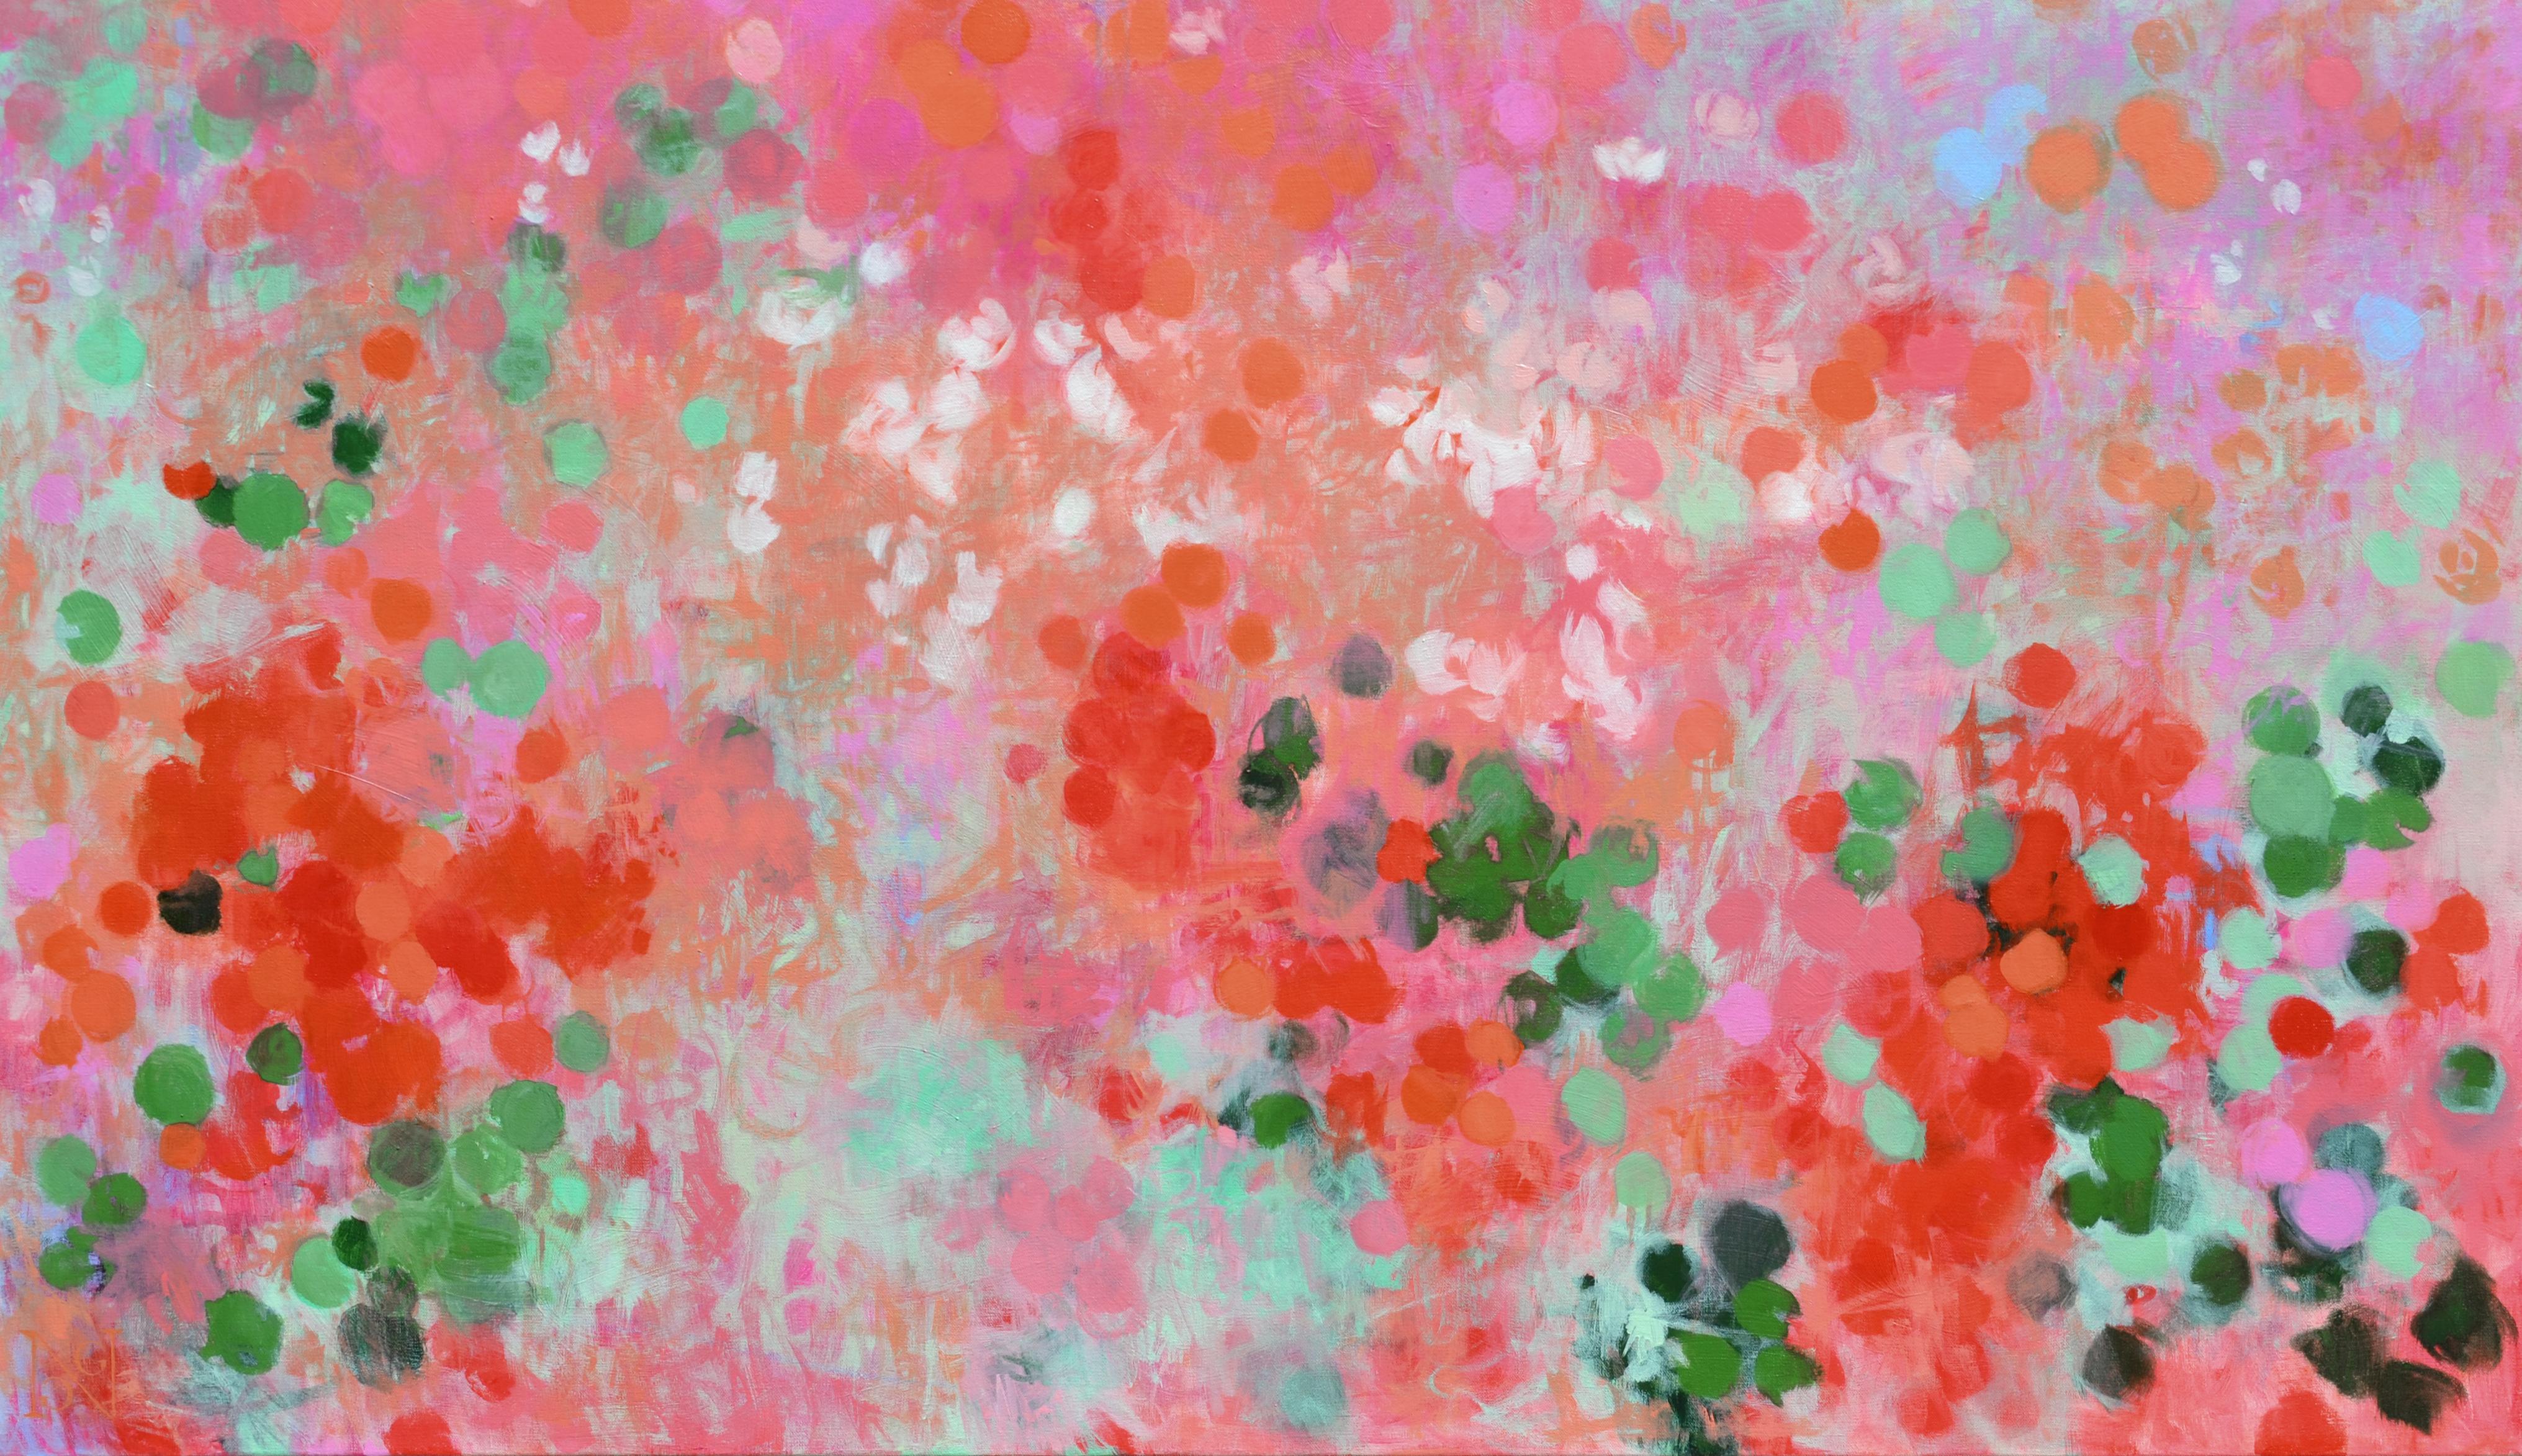 <p>Artist Comments<br>Artist Natalie George demonstrates an abstract expression of an abundant garden with clouds of flowers. Vibrant specks of magenta and orange hues flow in vigorous motion. "The nasturtium flowers and leaves are both